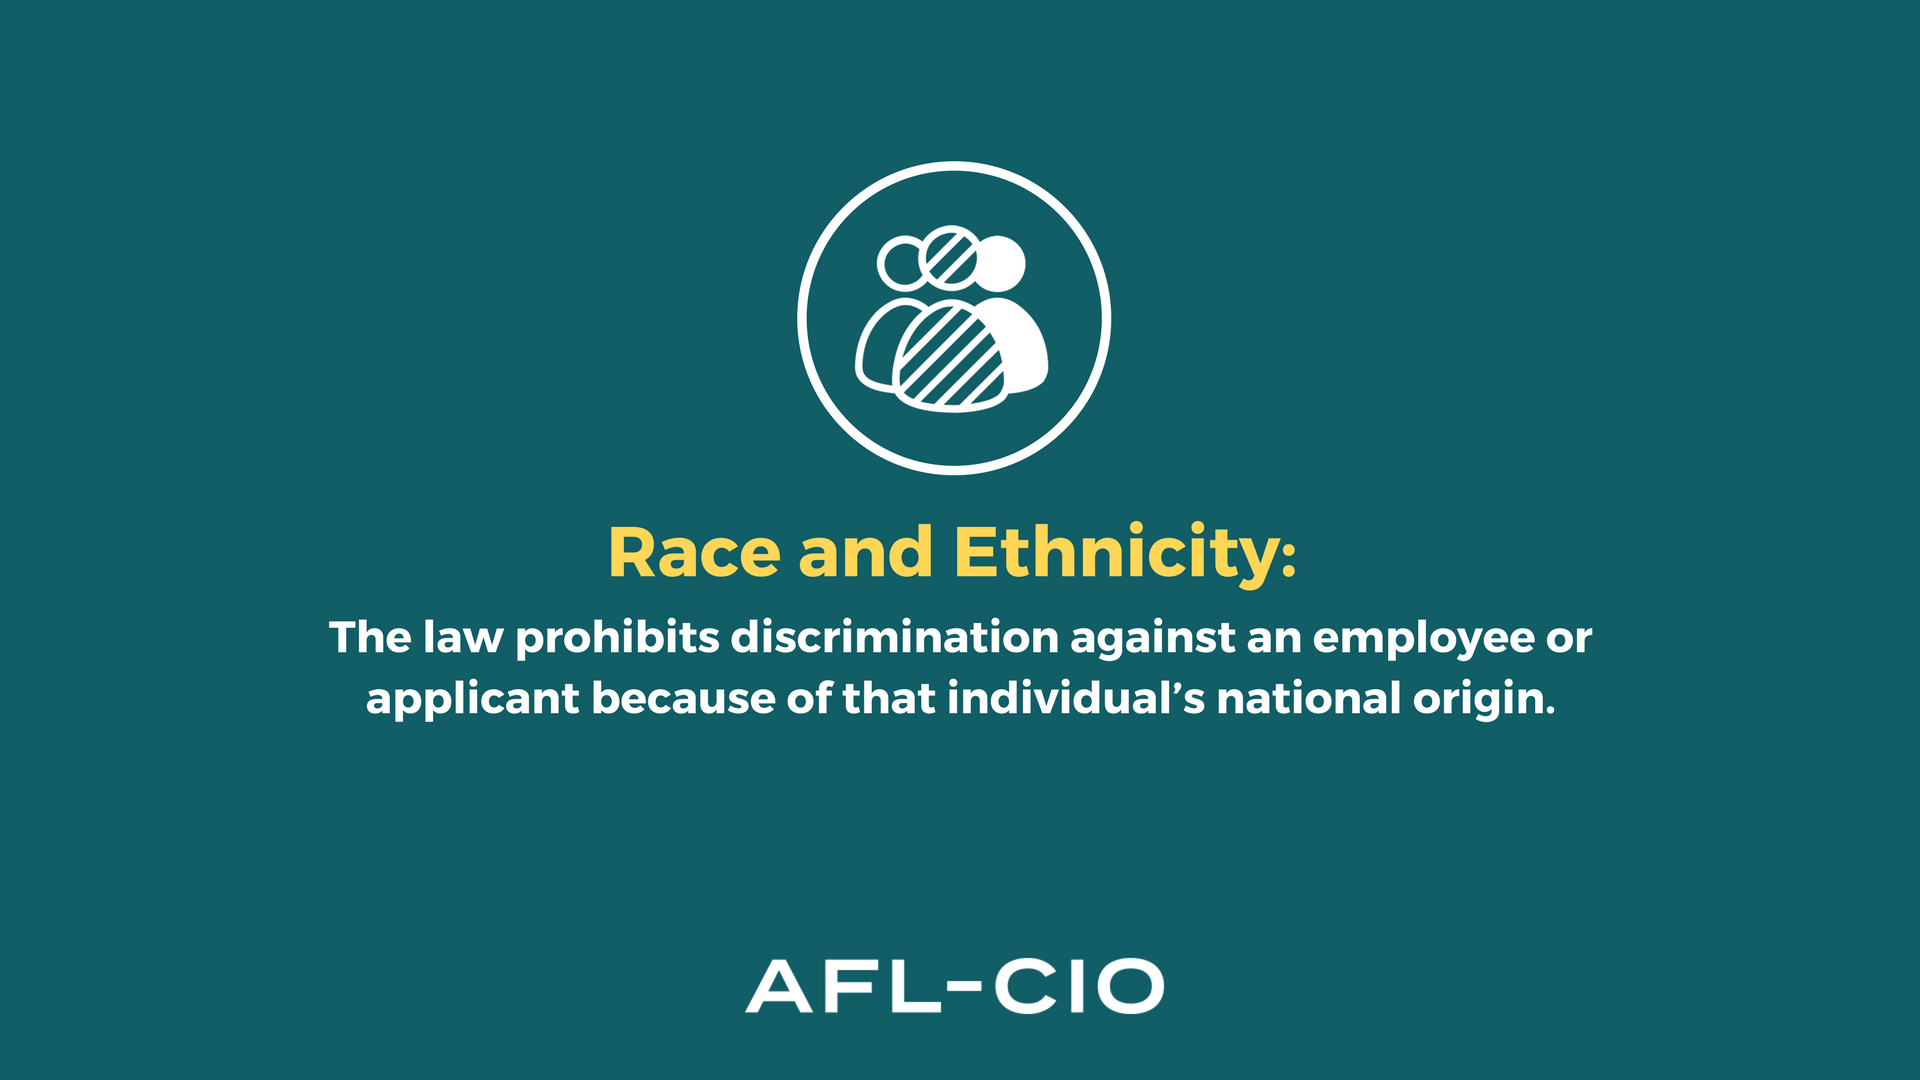 Race or Ethnicity: The law prohibits discrimination against an employee or applicant because of that individual's national origin.